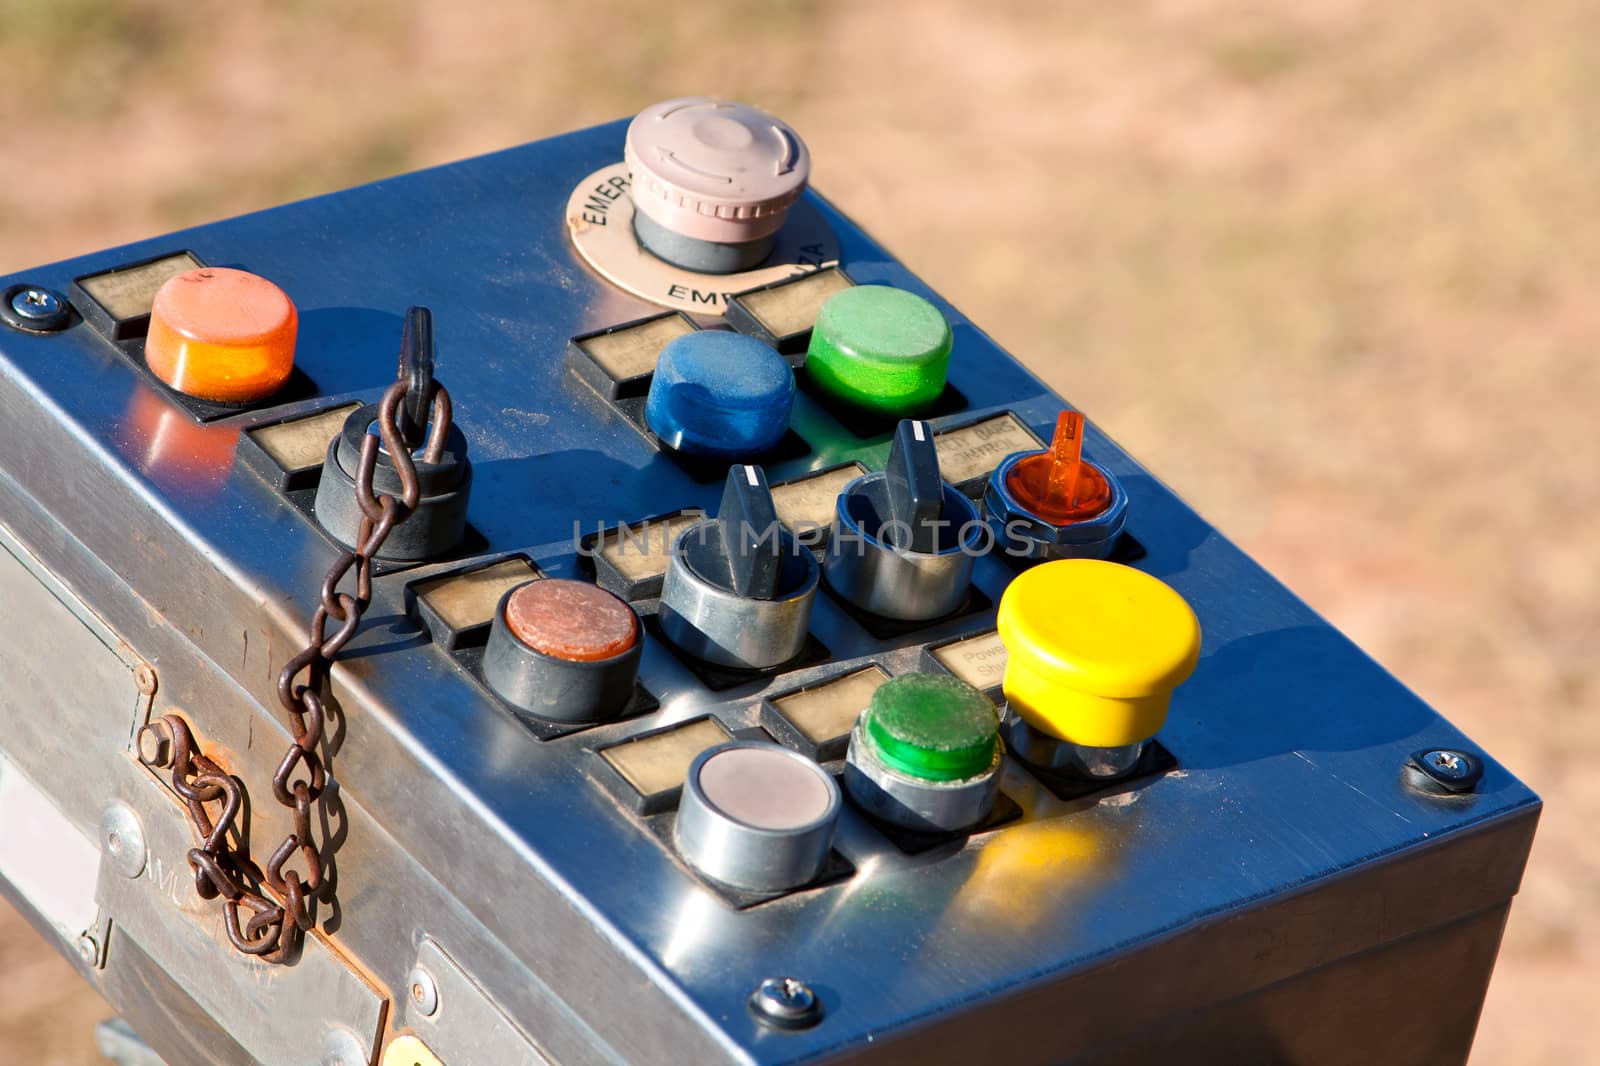 An old-fashioned industrial control panel with multi-colored buttons and switches, used to control a ride at a county fair.